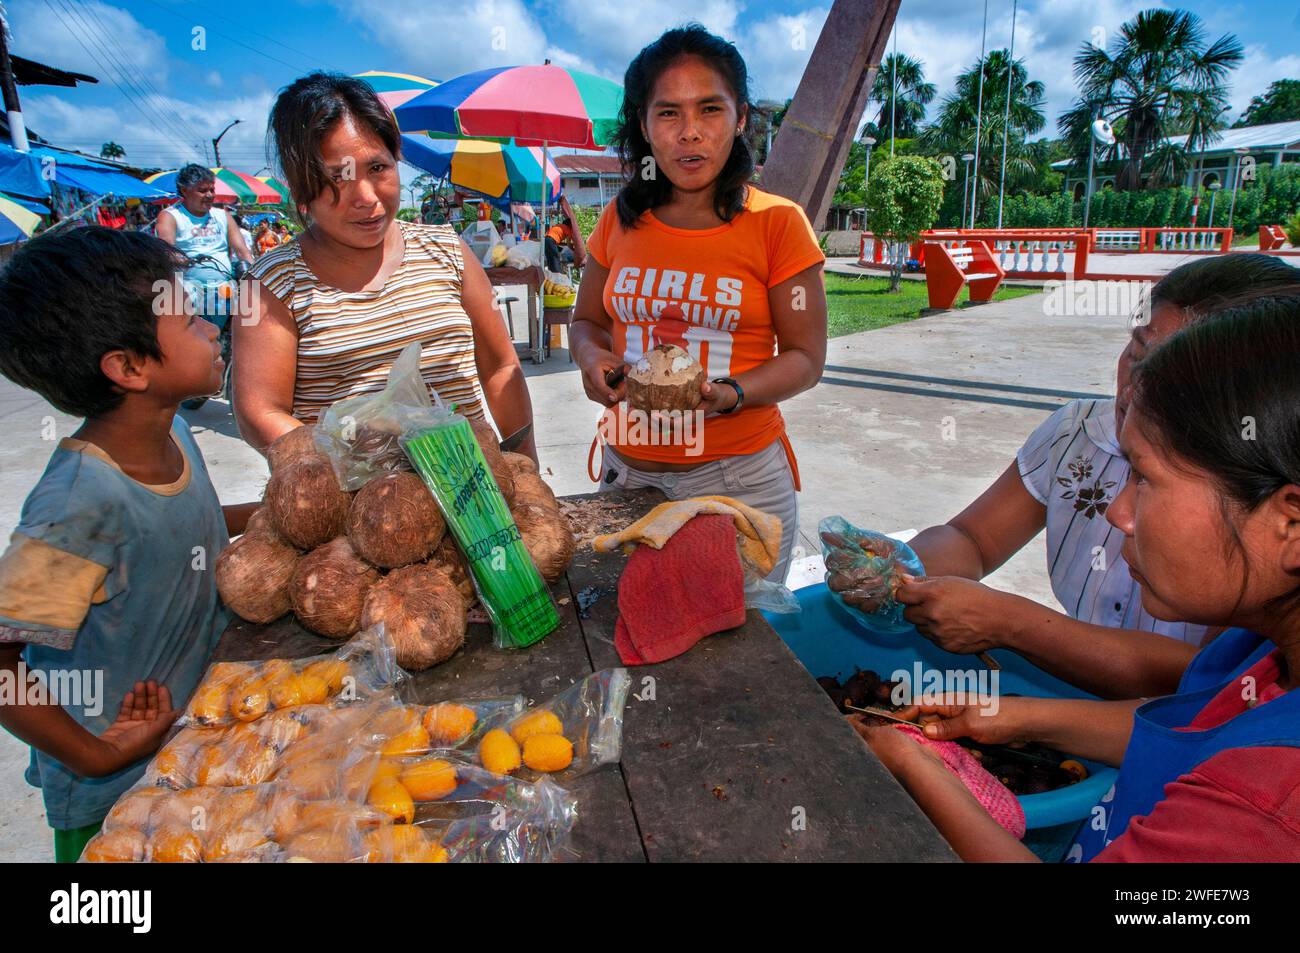 Market scenes, Iquitos, the largest city in the Peruvian rainforest, Peru, South America.  Iquitos is the capital city of Peru's Maynas Province and L Stock Photo